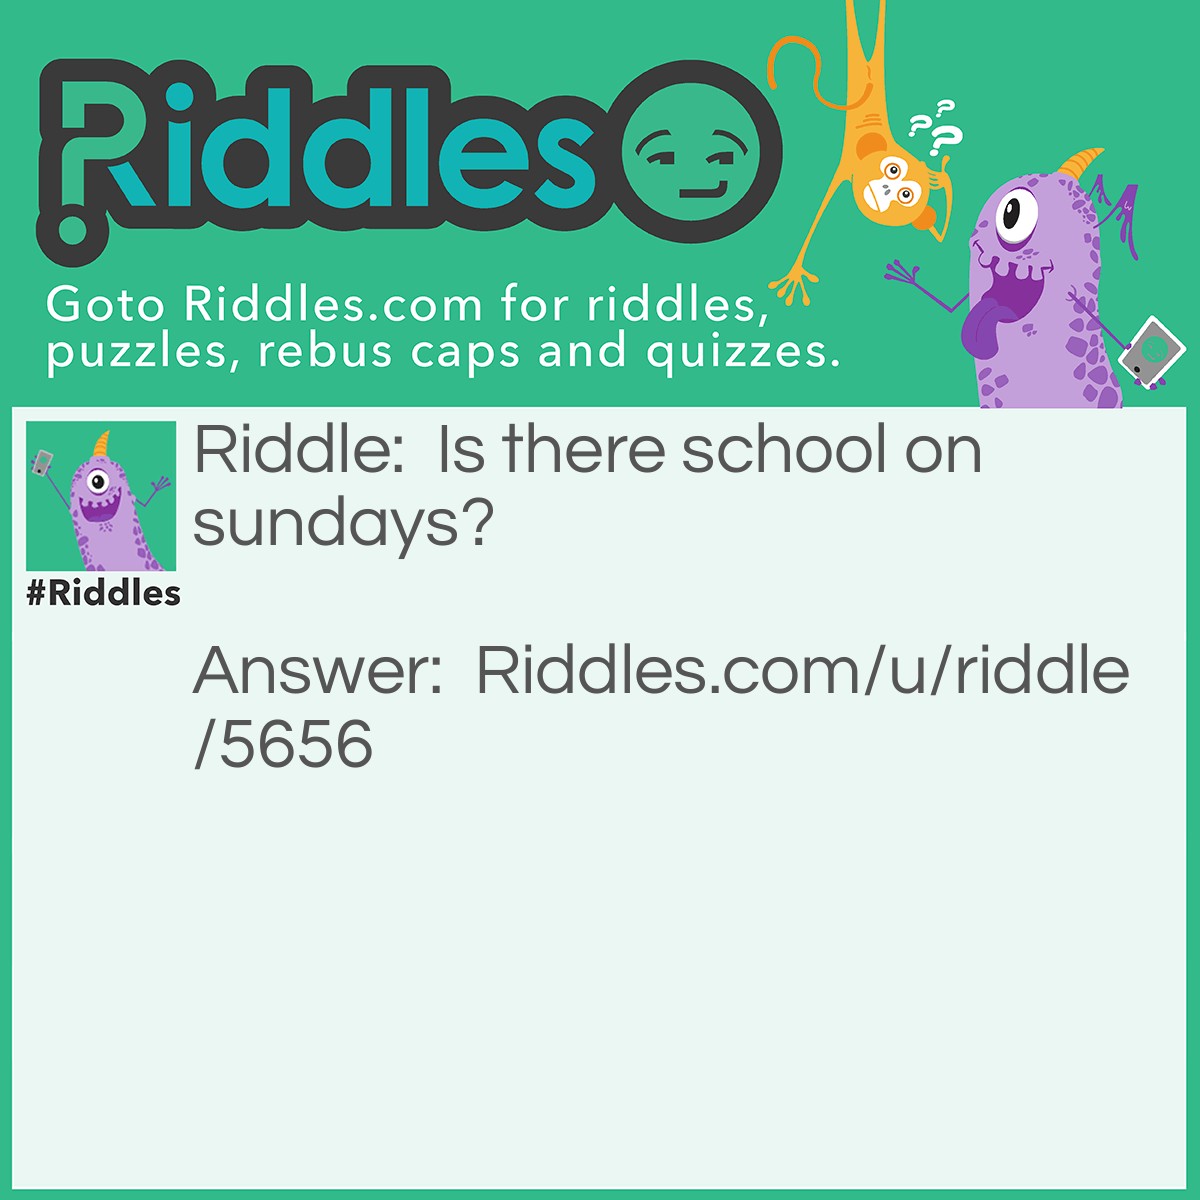 Riddle: Is there school on sundays? Answer: Yes. It is called sunday school.